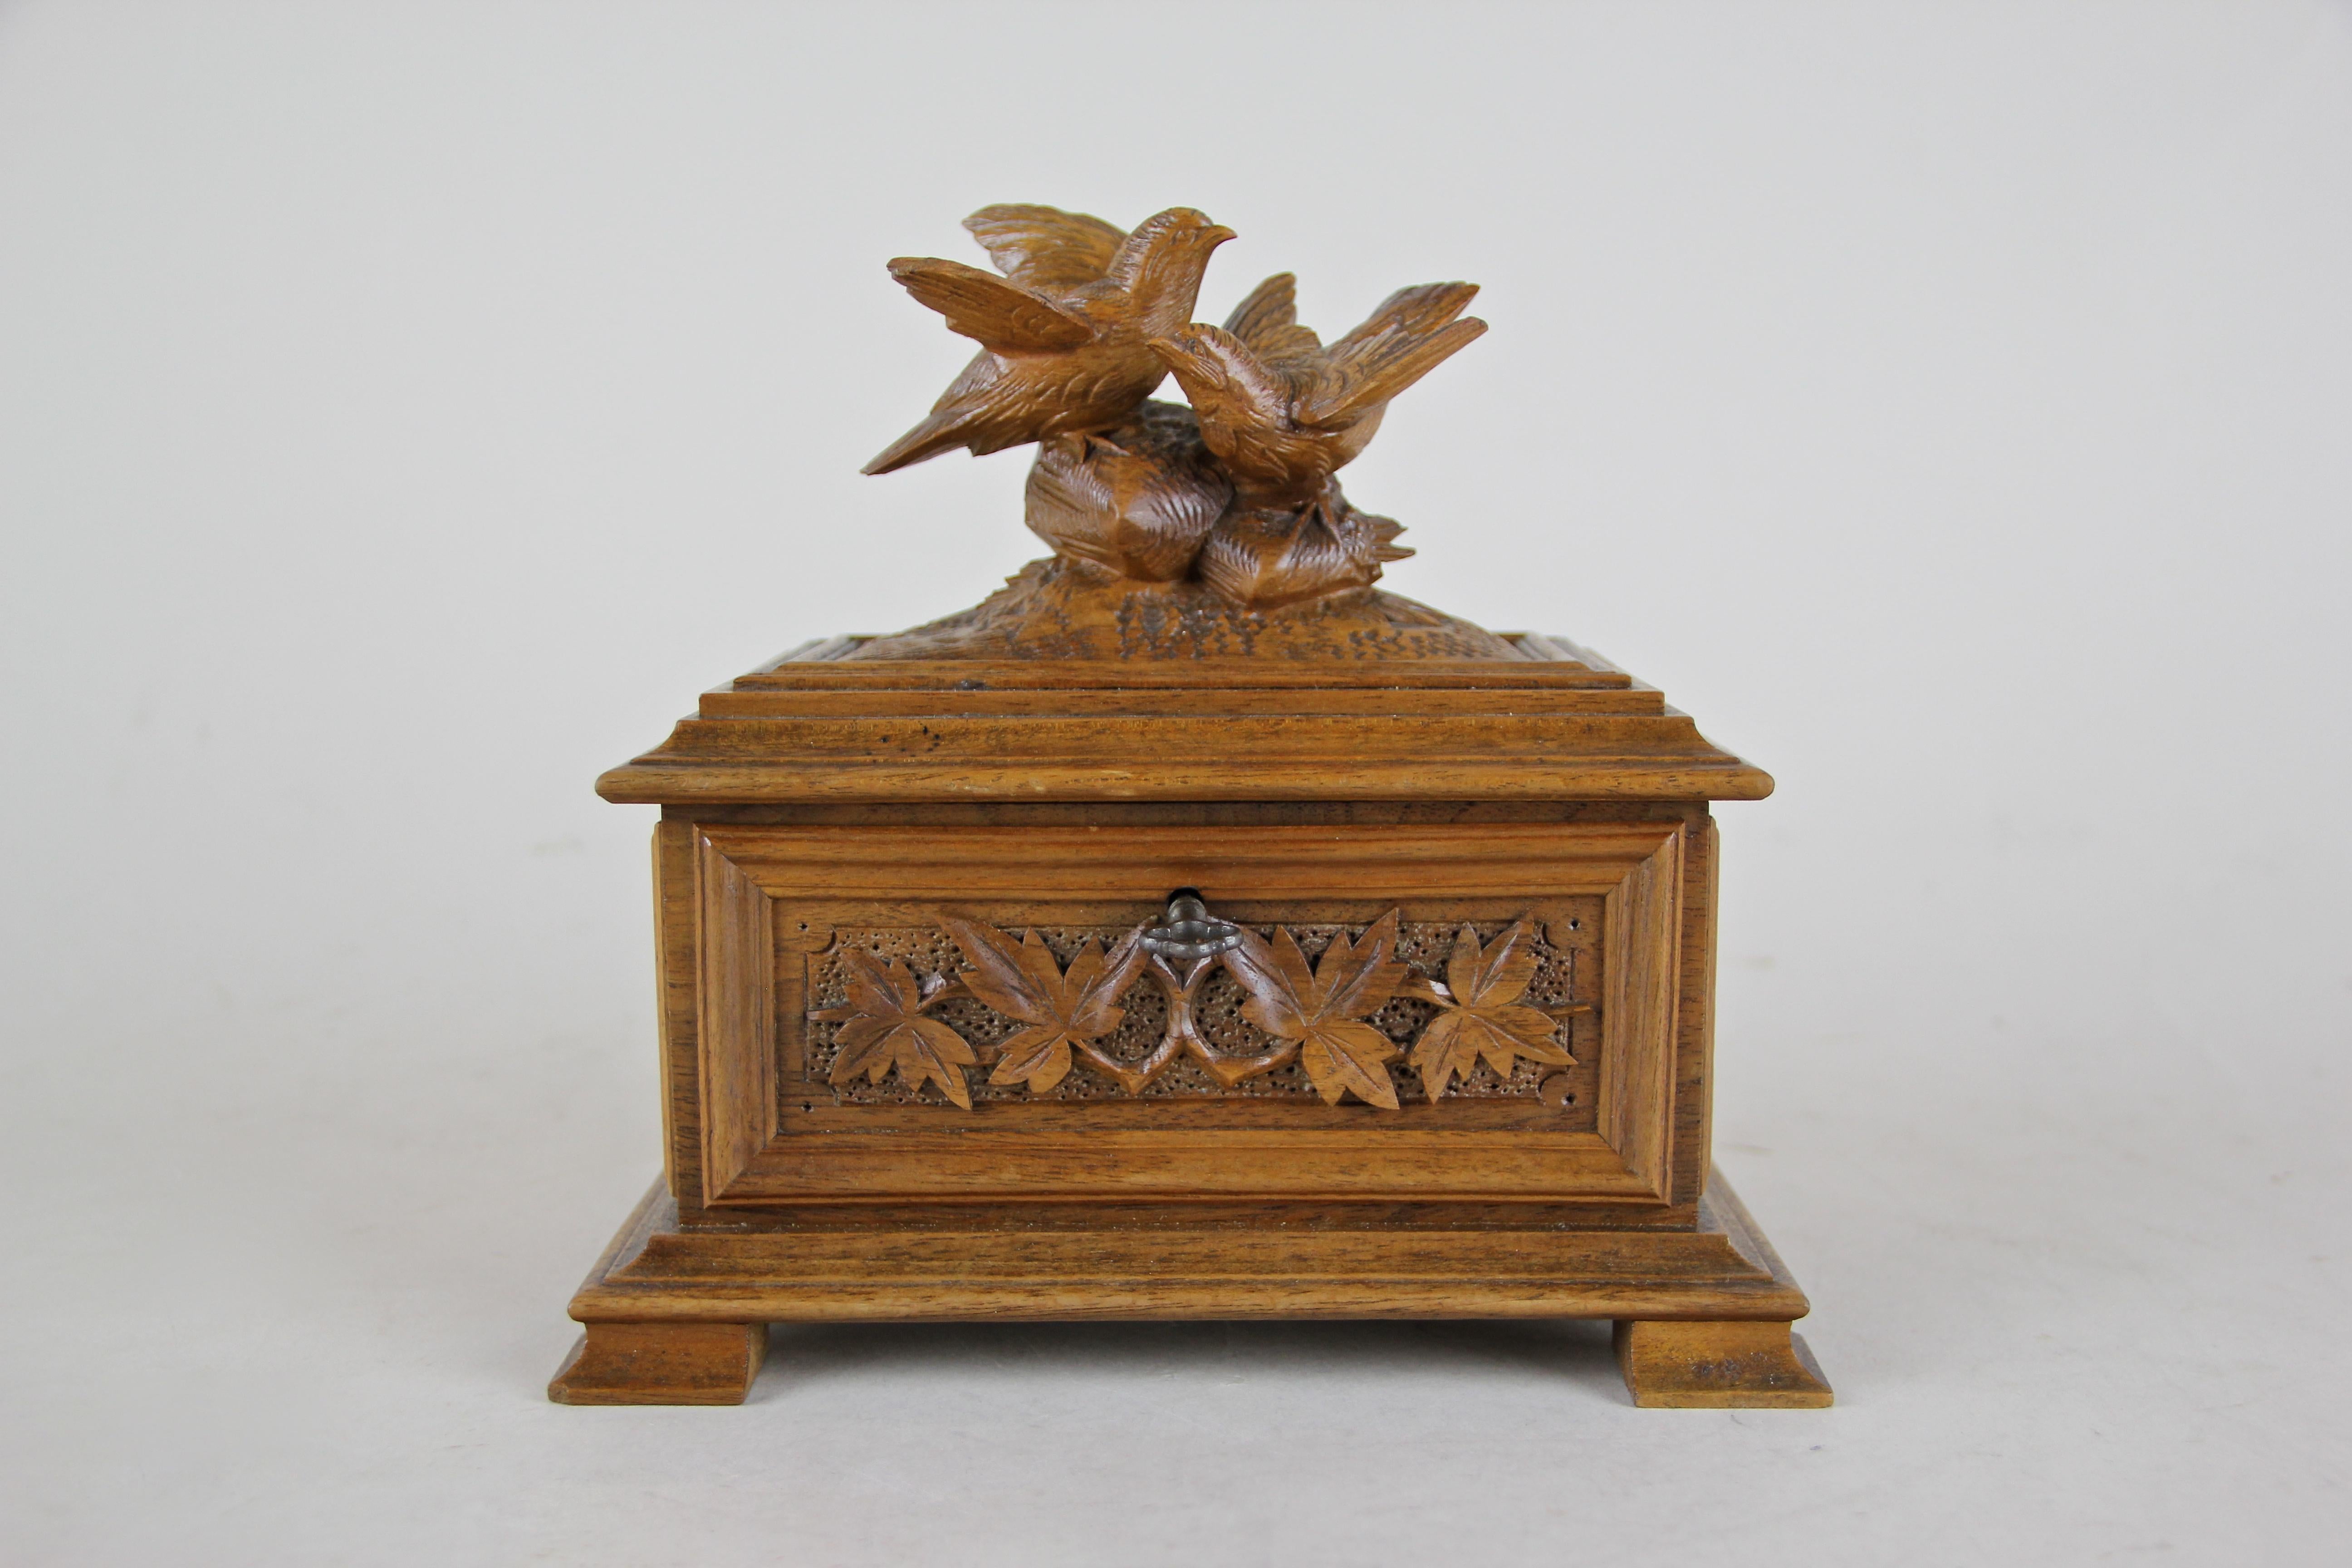 Charming small Art Nouveau jewelry music box out of France, circa 1900. This fantastic wooden box comes with elaborately hand carved details like the beautiful foliage around the body or the lovely birds on the lid. Inside you find a small